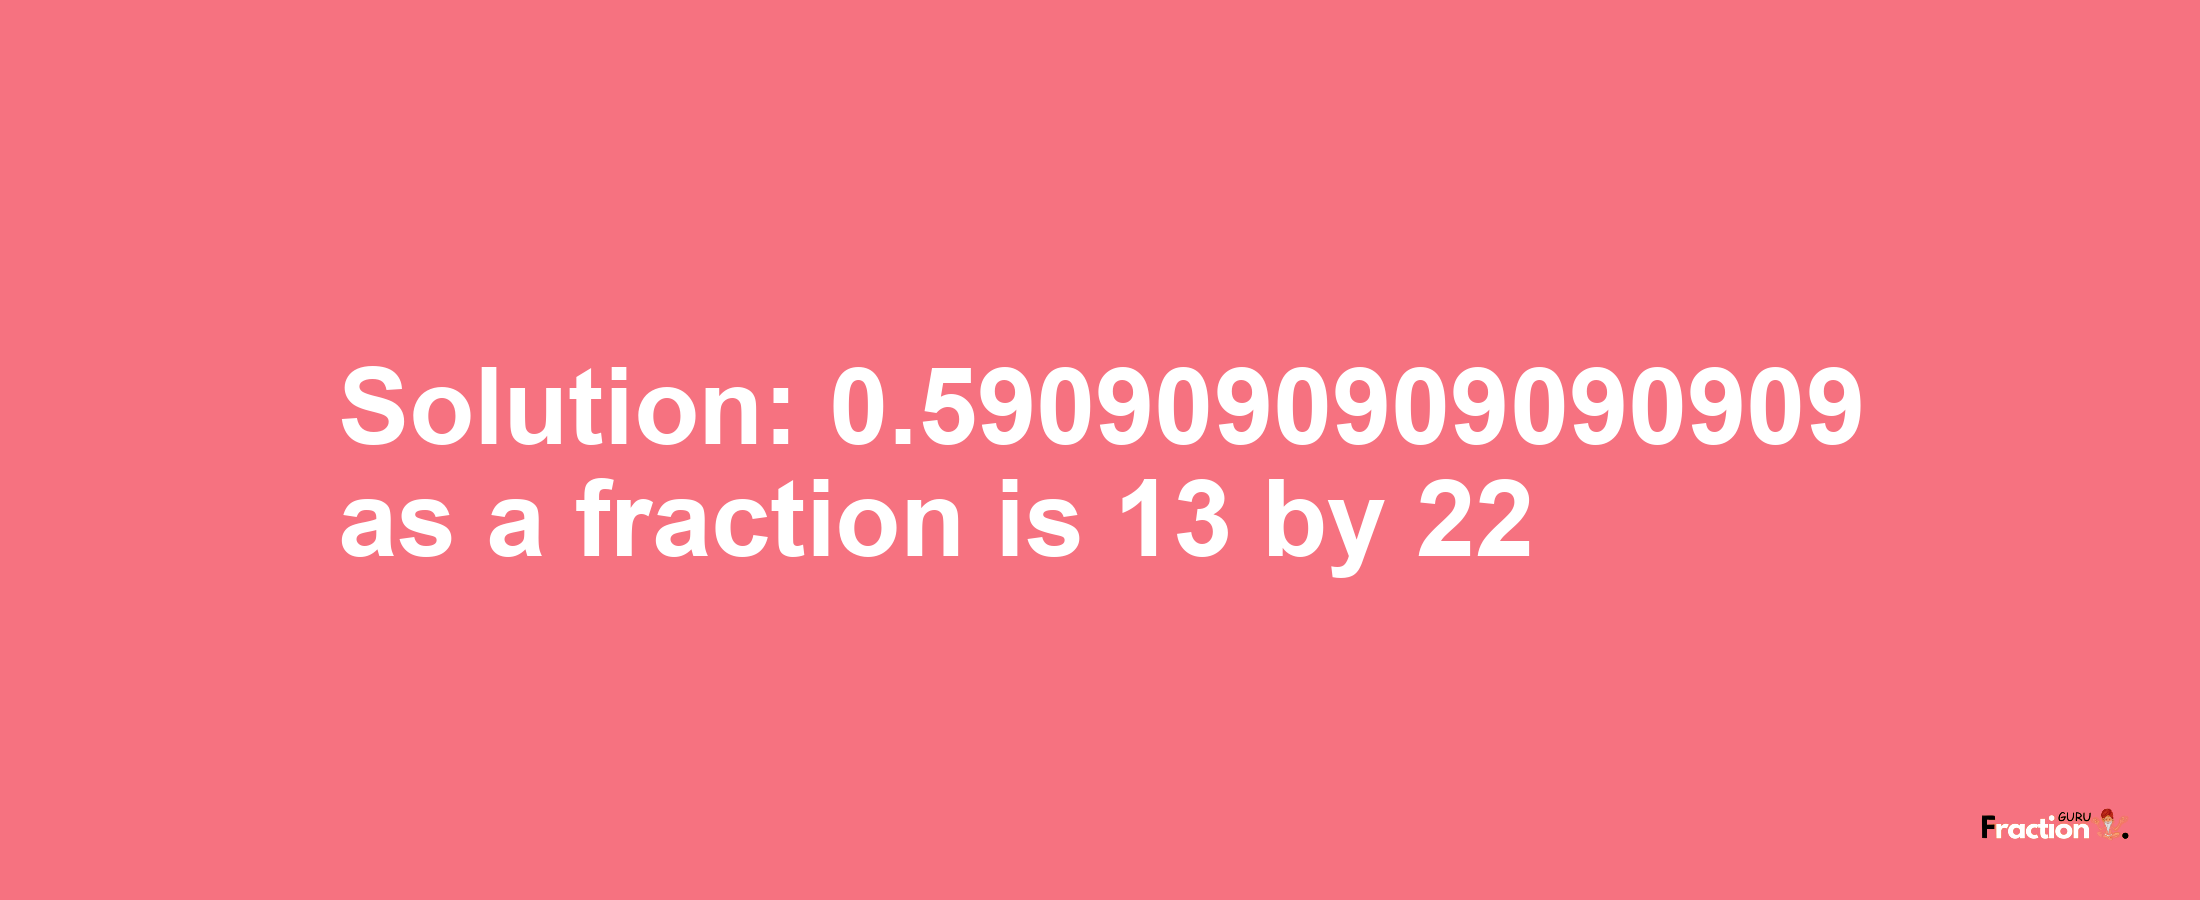 Solution:0.5909090909090909 as a fraction is 13/22